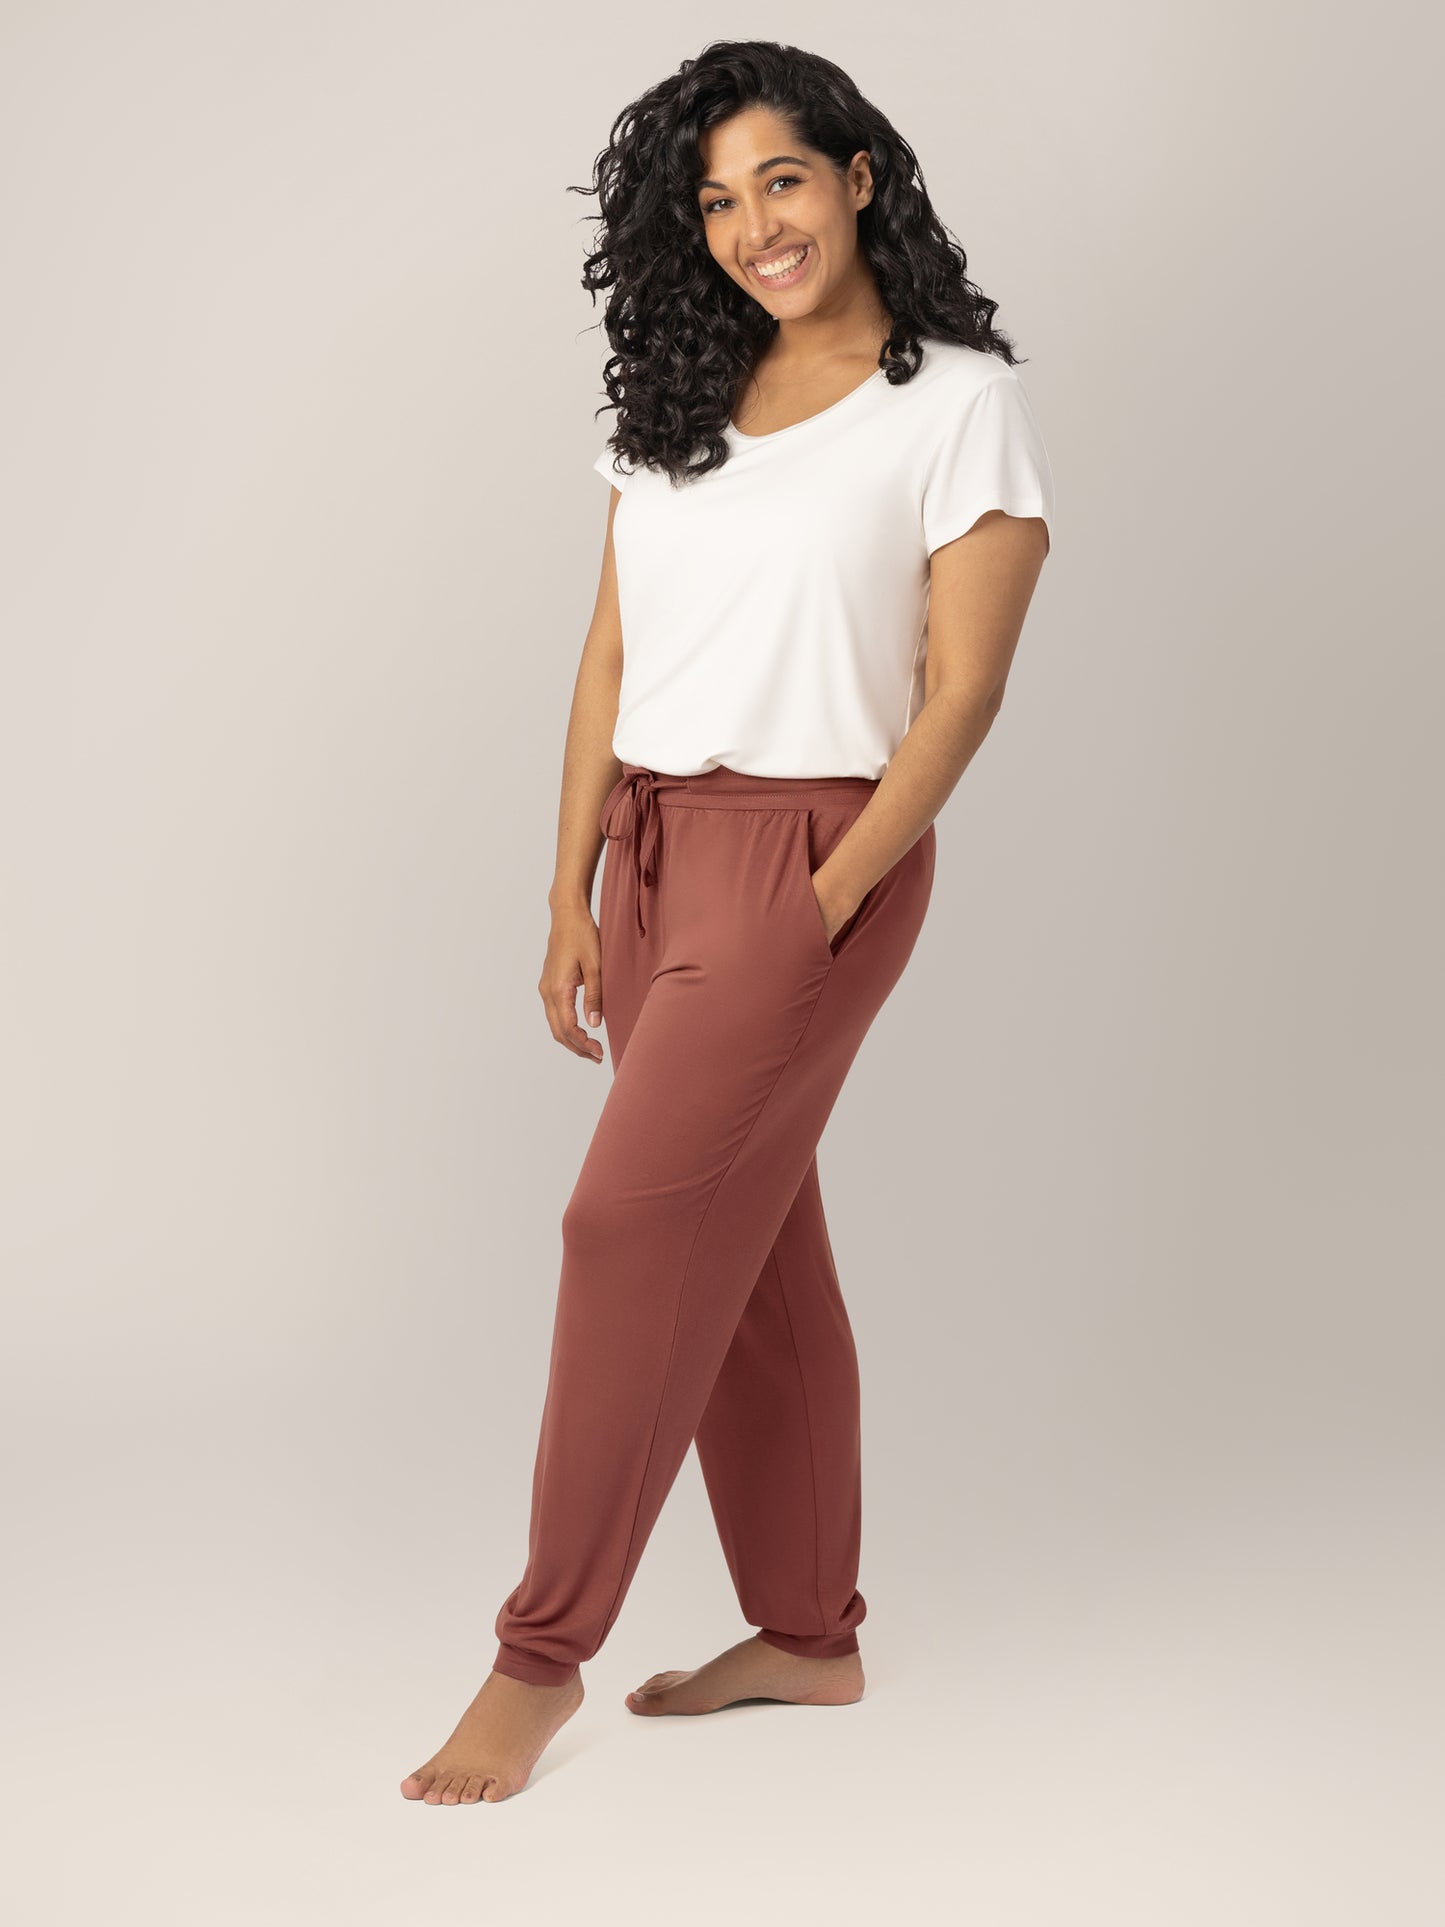 3/4 front view of model wearing the Everyday Lounger Jogger in Redwood, with one hand in pocket, paired with the Everyday Maternity & Nursing T-shirt in White. @model_info:Zakeeya is 5'2" and wearing a Small Regular.